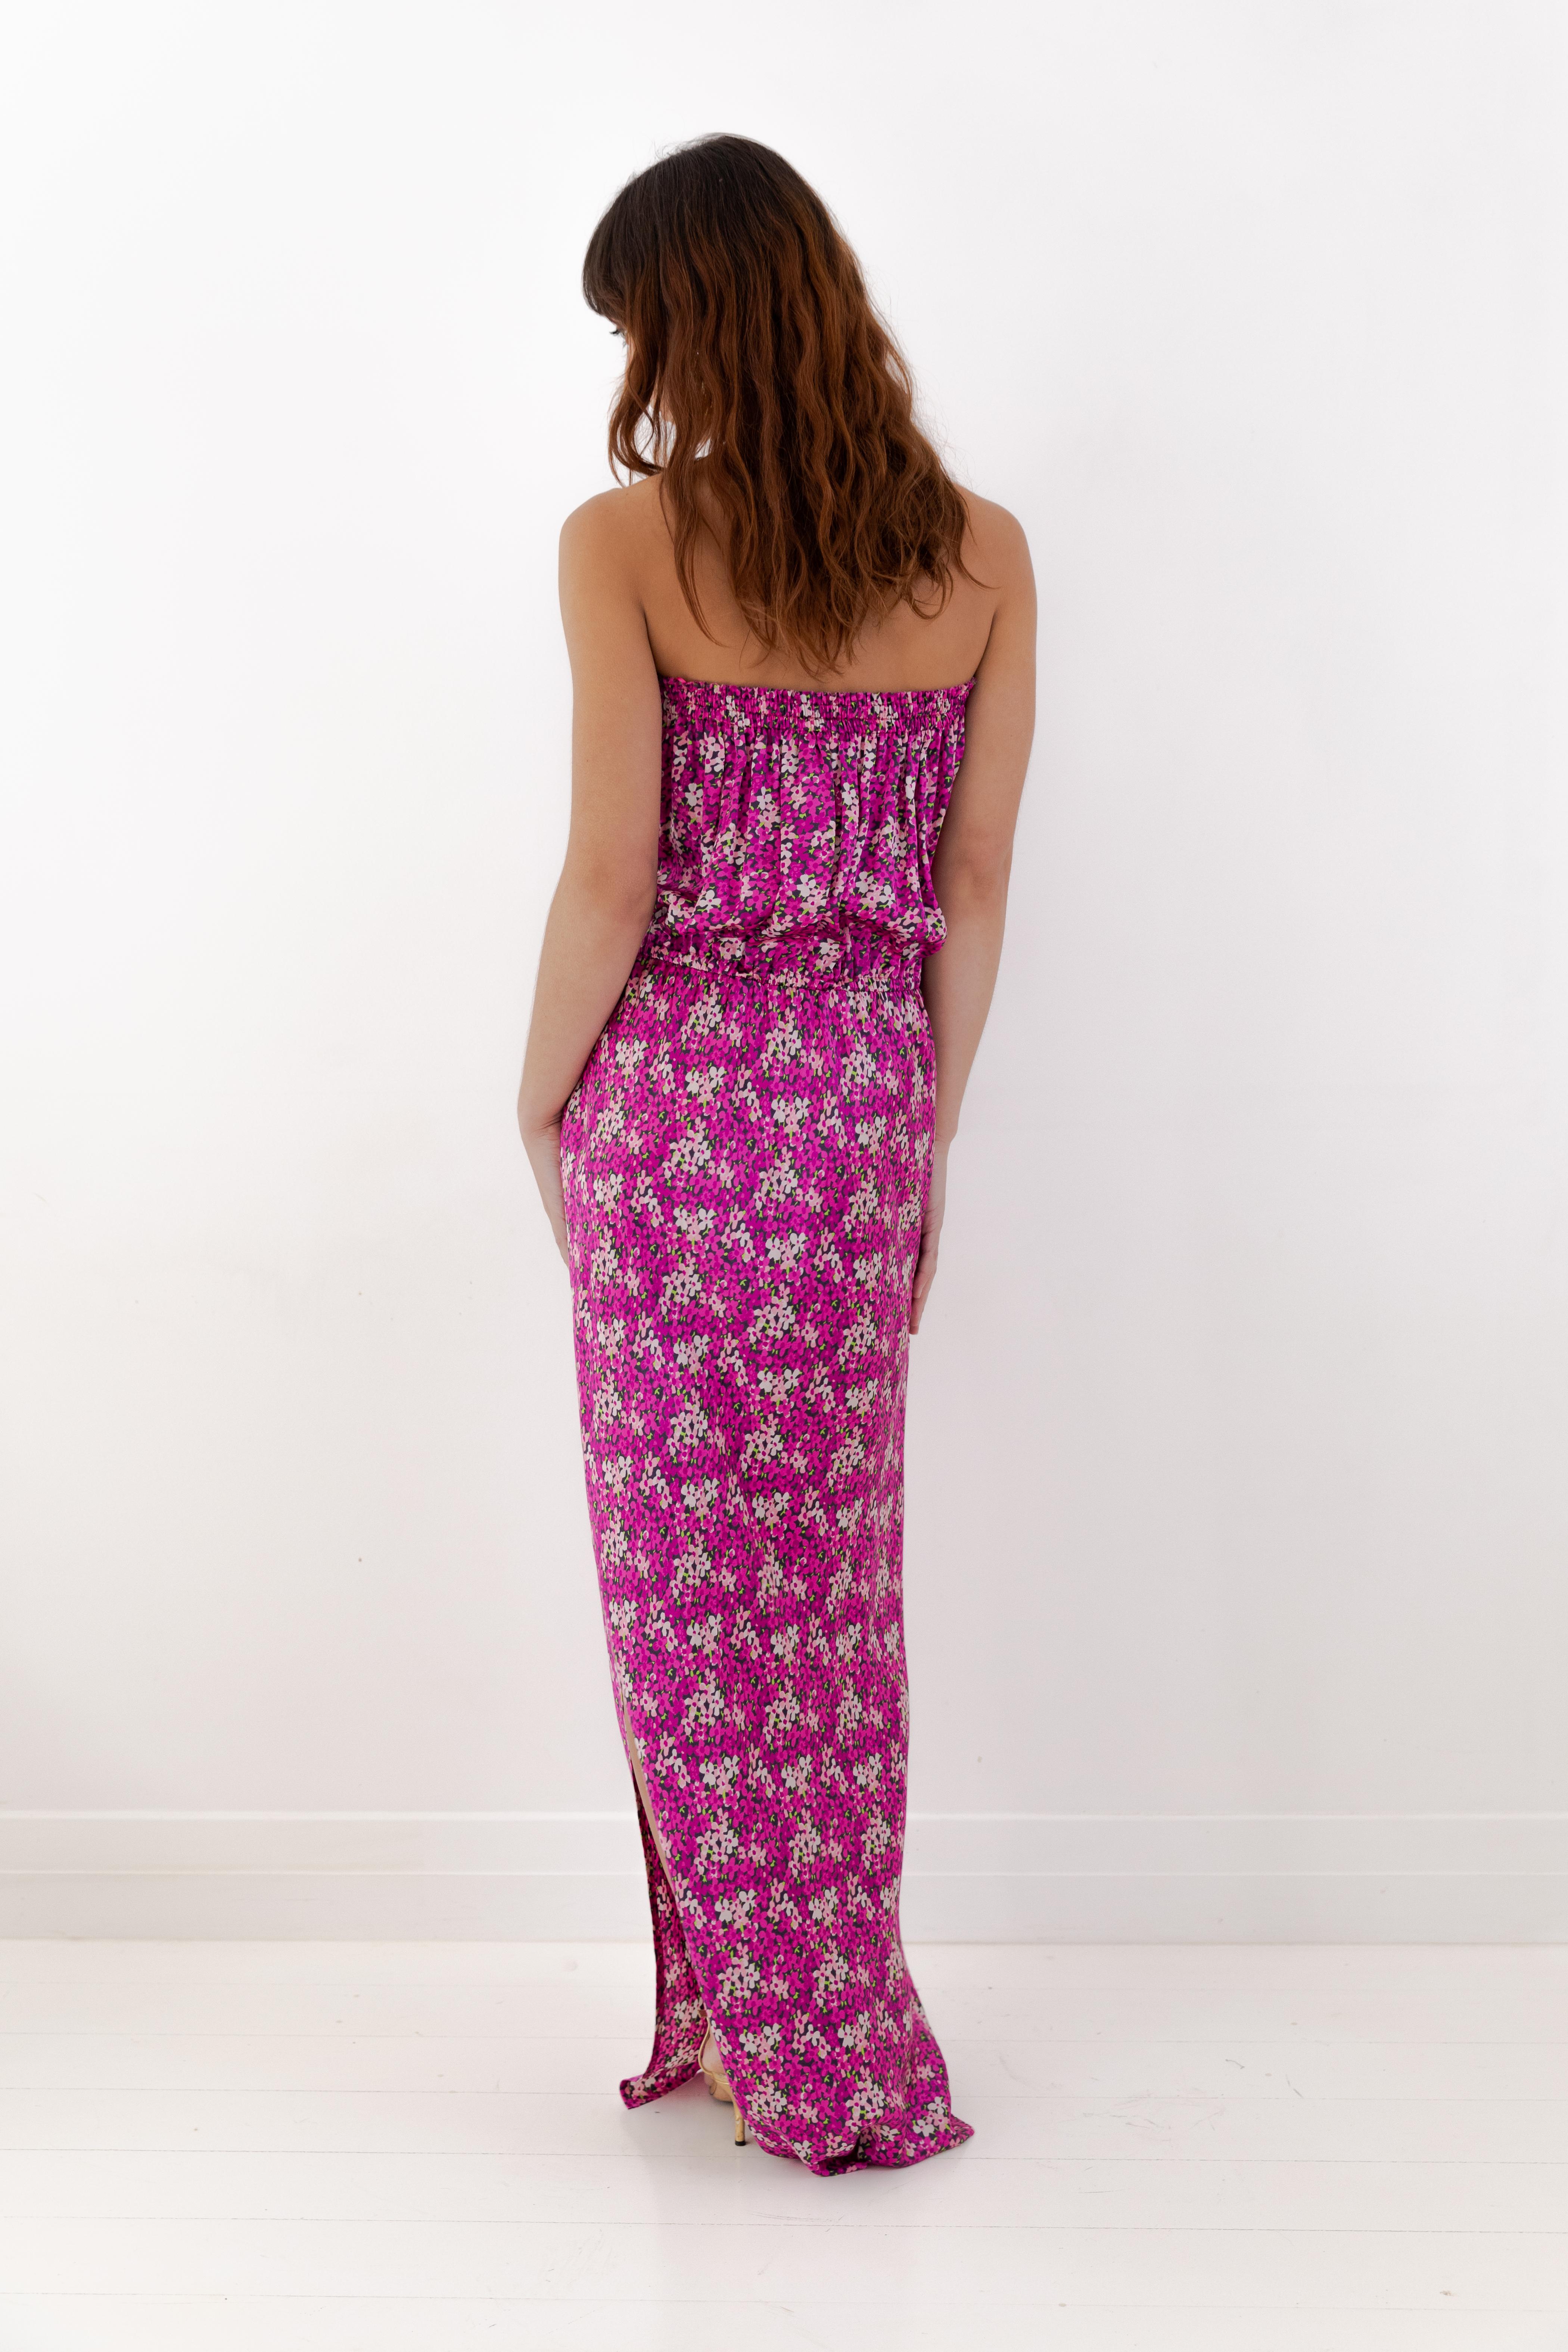 Lanvin Resort 2010 Strapless Floral Print Silk Maxi Gown For Sale 2